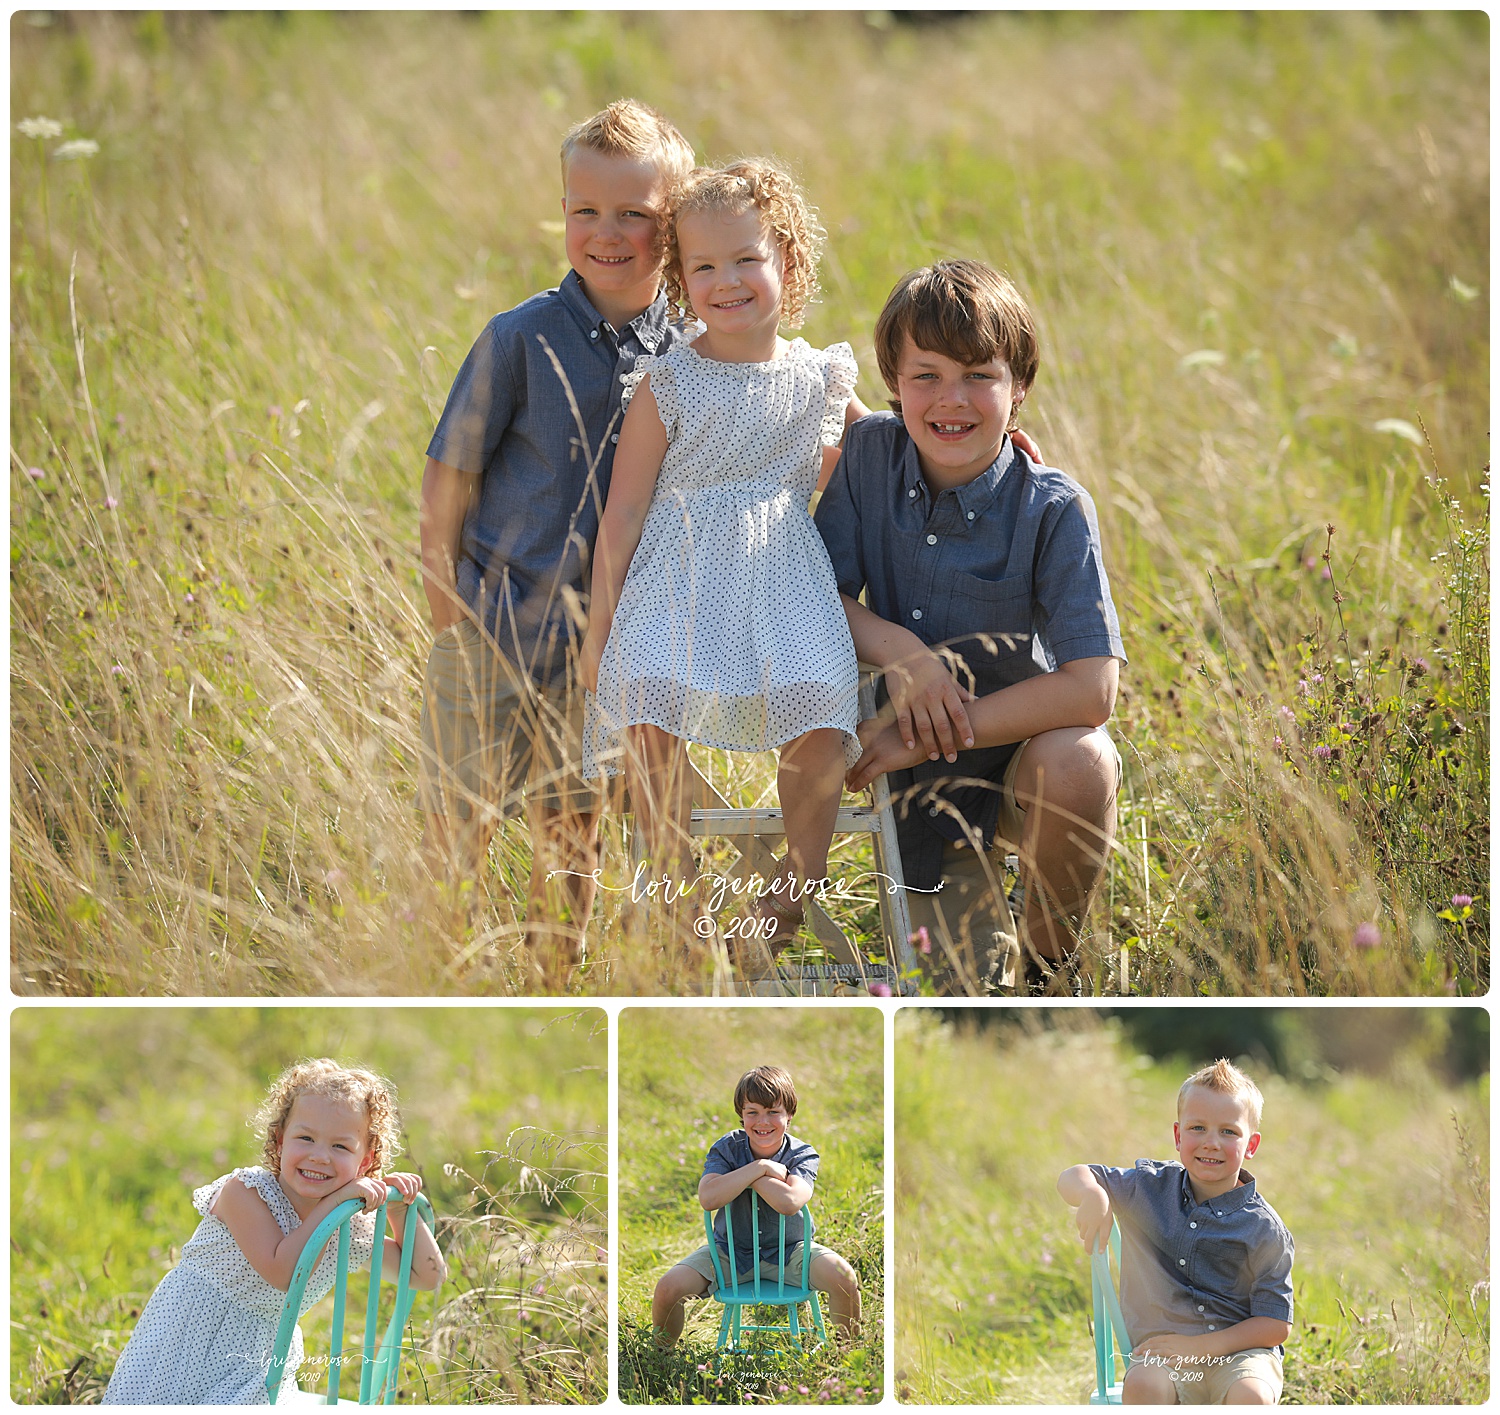 Gorgeous family session with these super fun kiddos- Owen, Jake and Ava, come back any time!